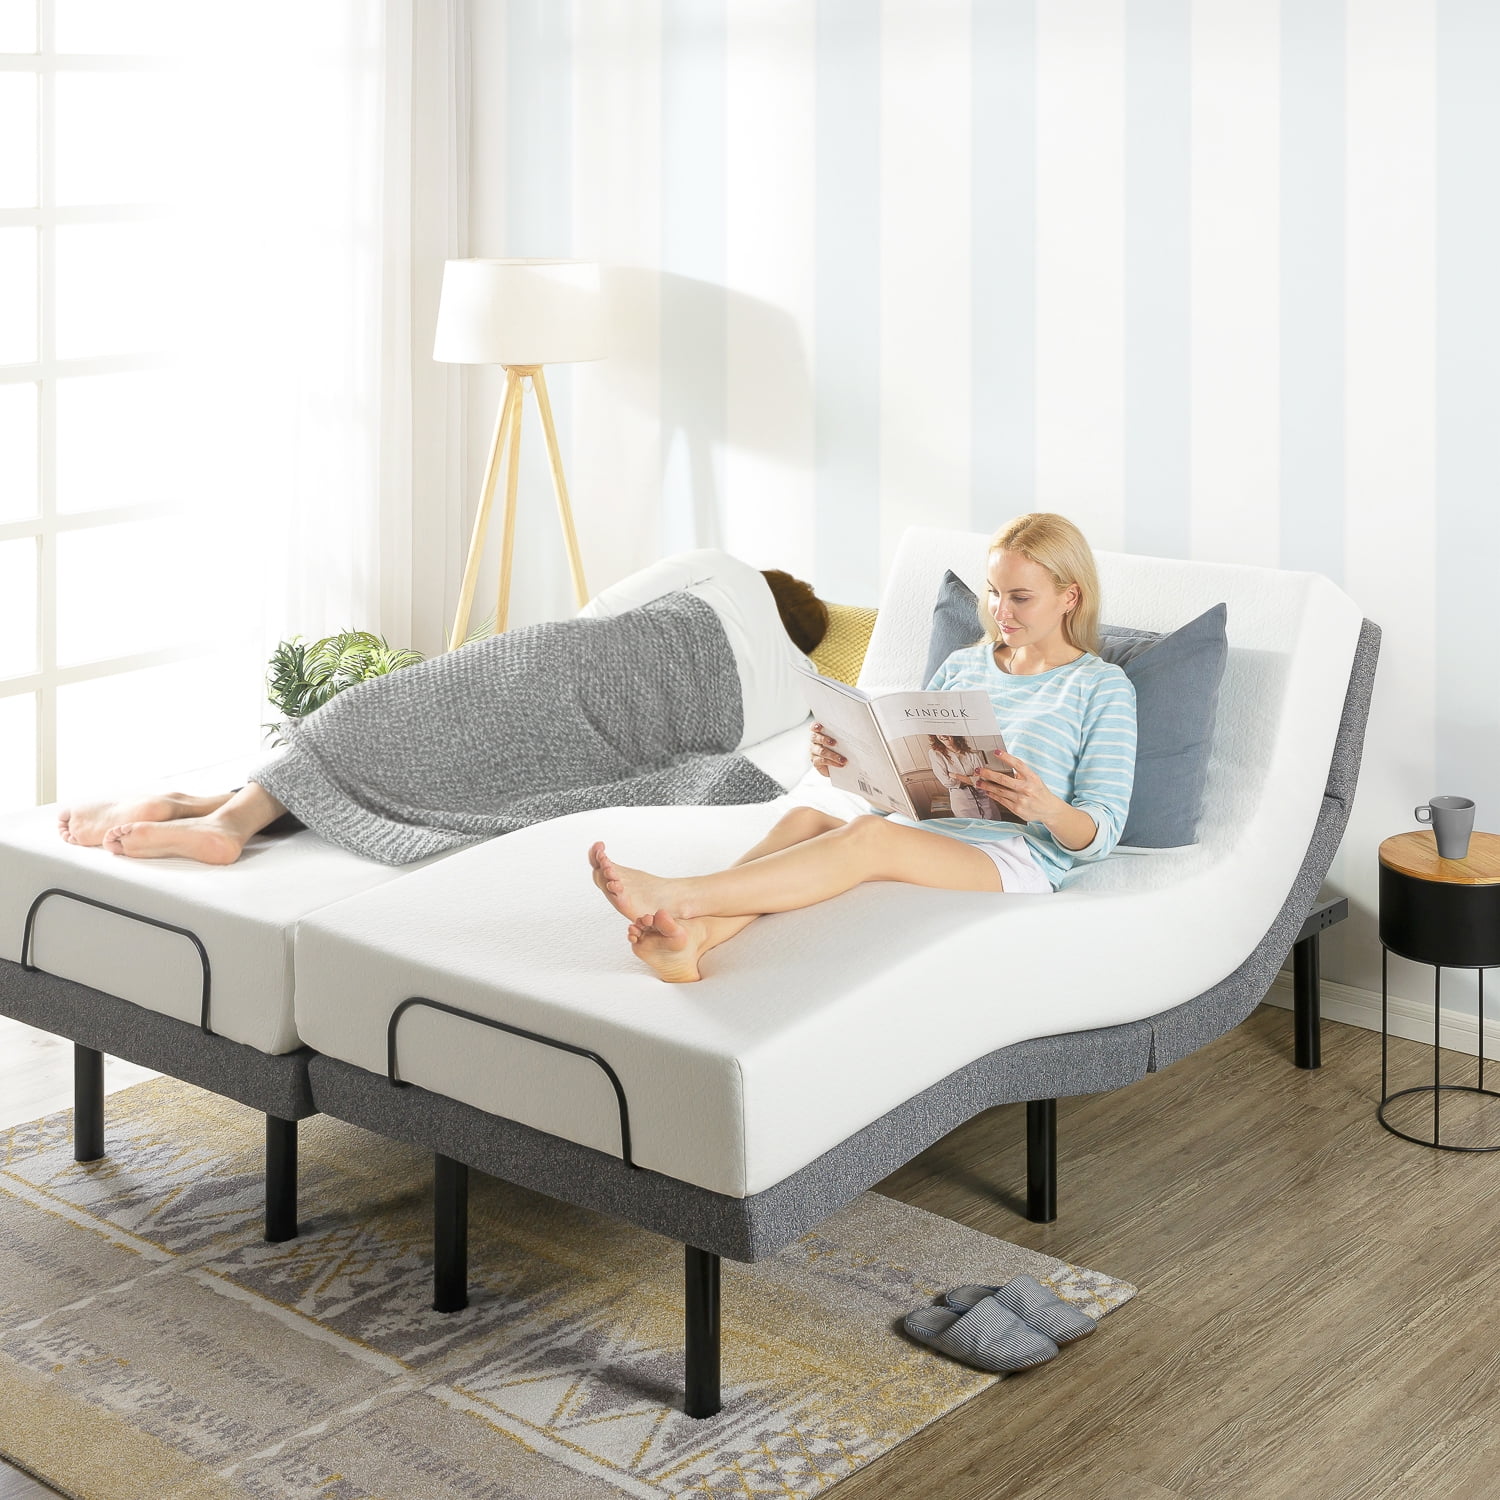 Mellow Adjustable Bed Base Unique Added, Adjustable King Beds With Mattress